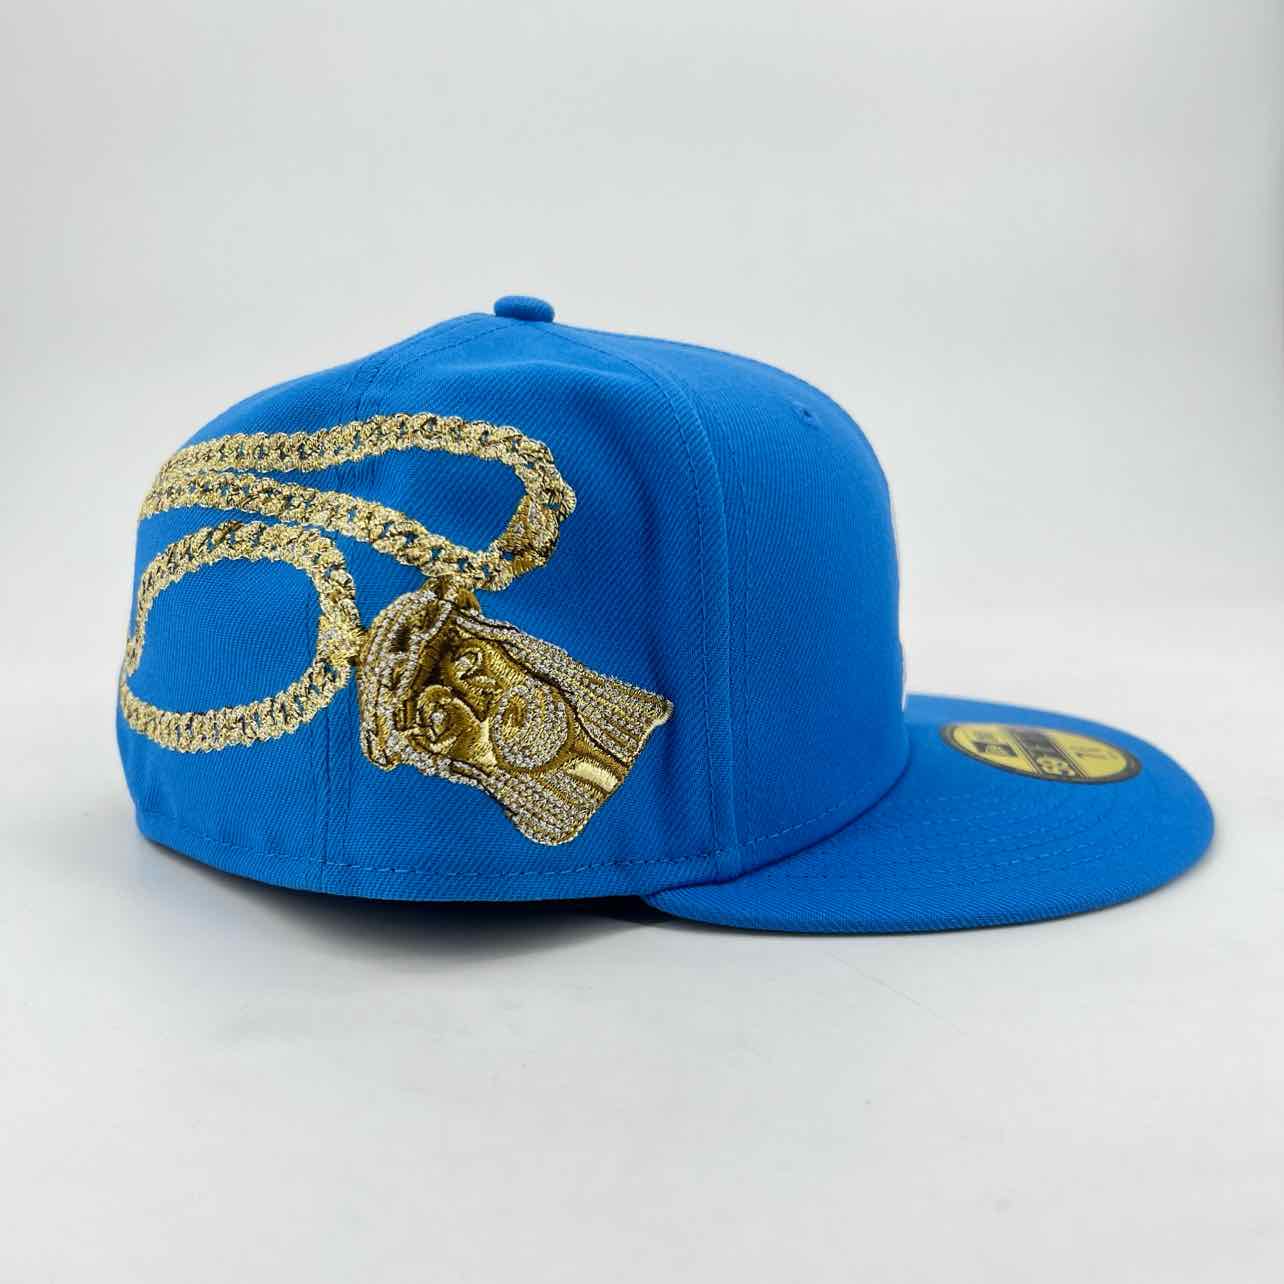 Supreme Fitted Hat "JESUS PIECE" New Baby Blue Size 7 3/8